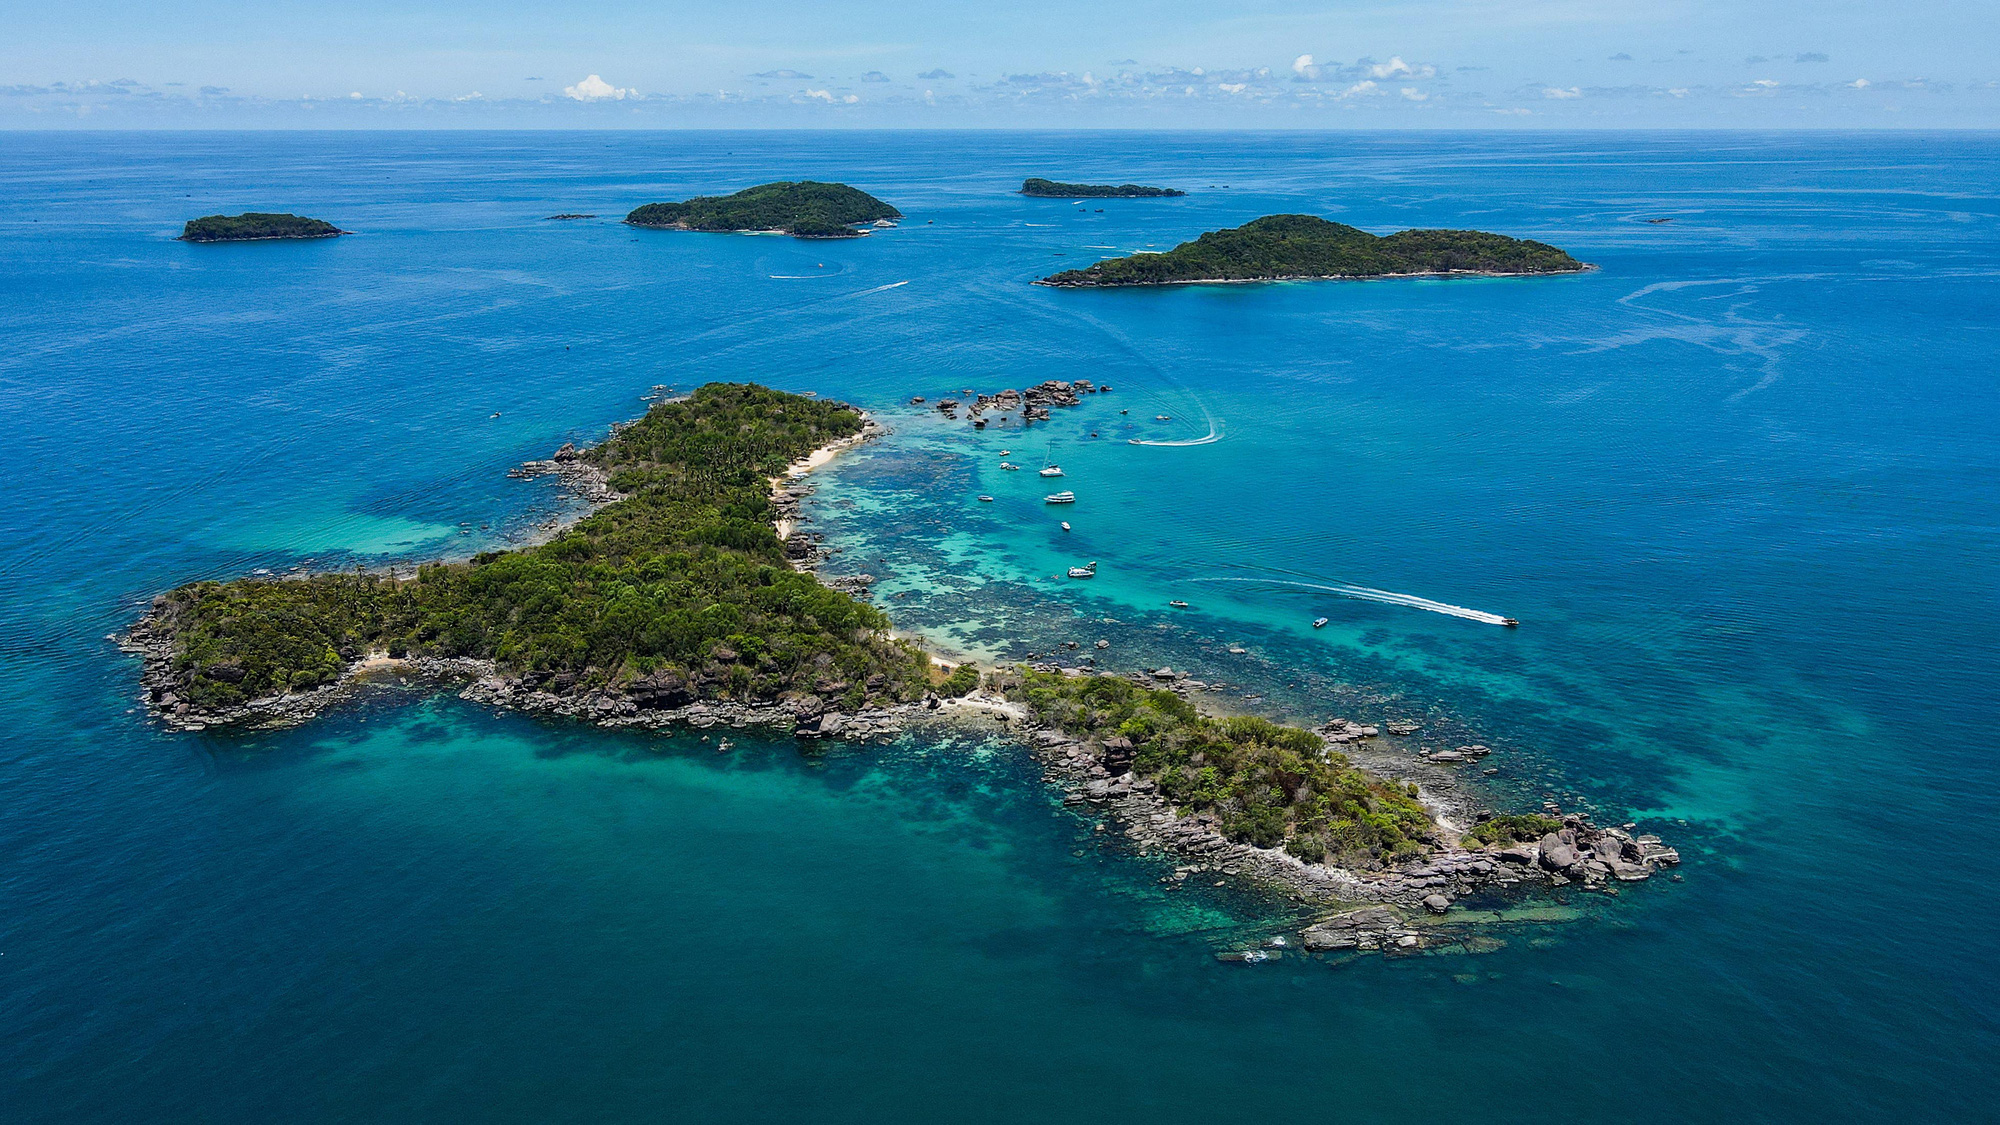 A bird’s eye view of islets located south of Phu Quoc island off the southern province of Kien Giang. Photo: Hoang Giam / Tuoi Tre